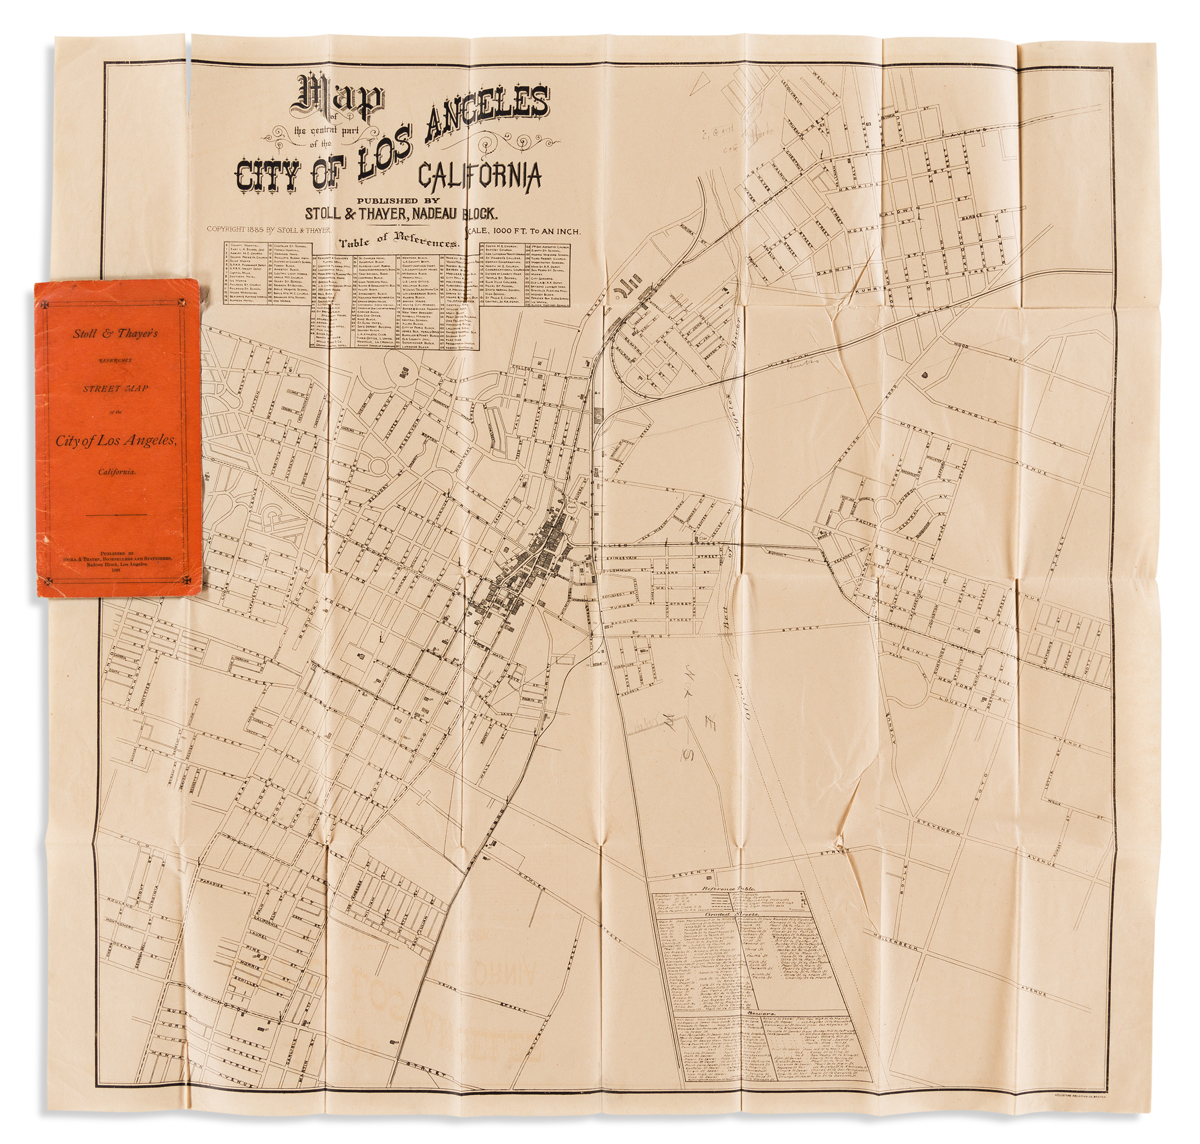 (CALIFORNIA.) Stoll, Simon; and J.S. Thayer. Map of the Central Part of the City of Los Angeles California.